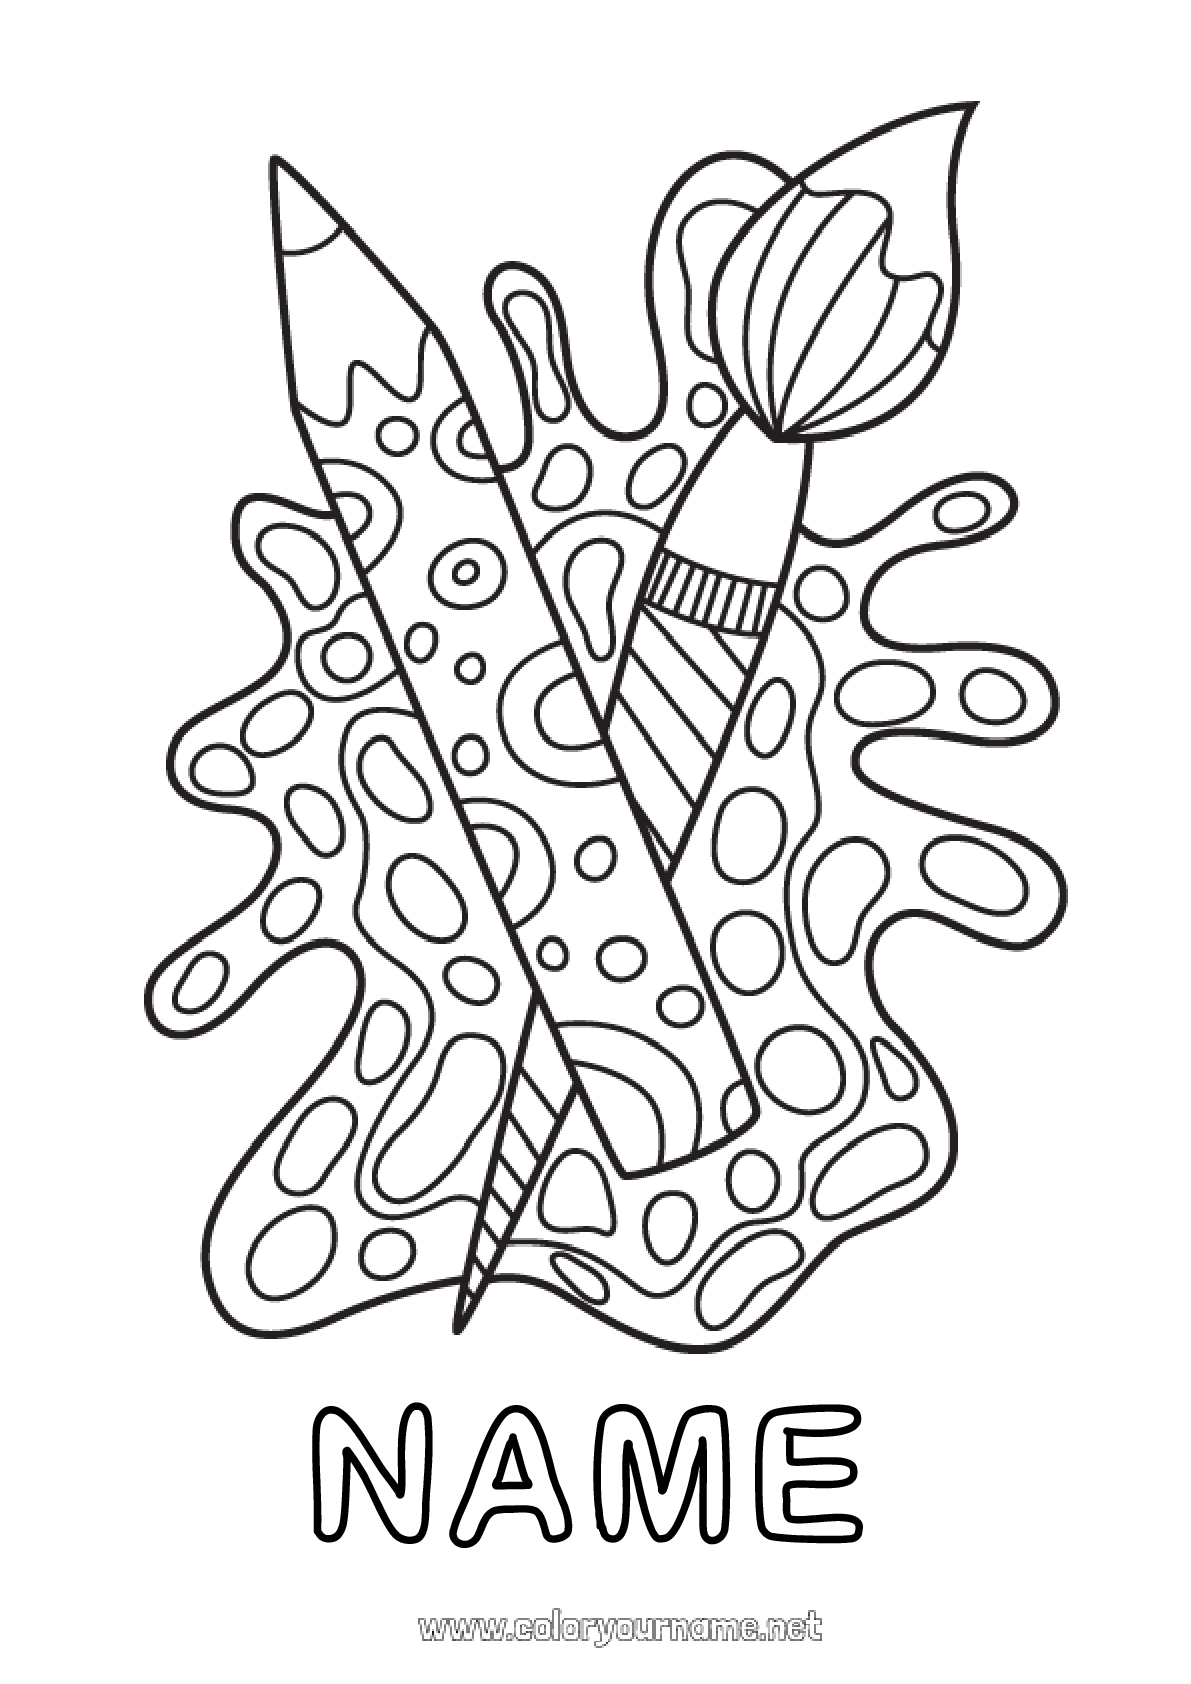 Coloring page No.1356 - Art Brush Coloured pencil